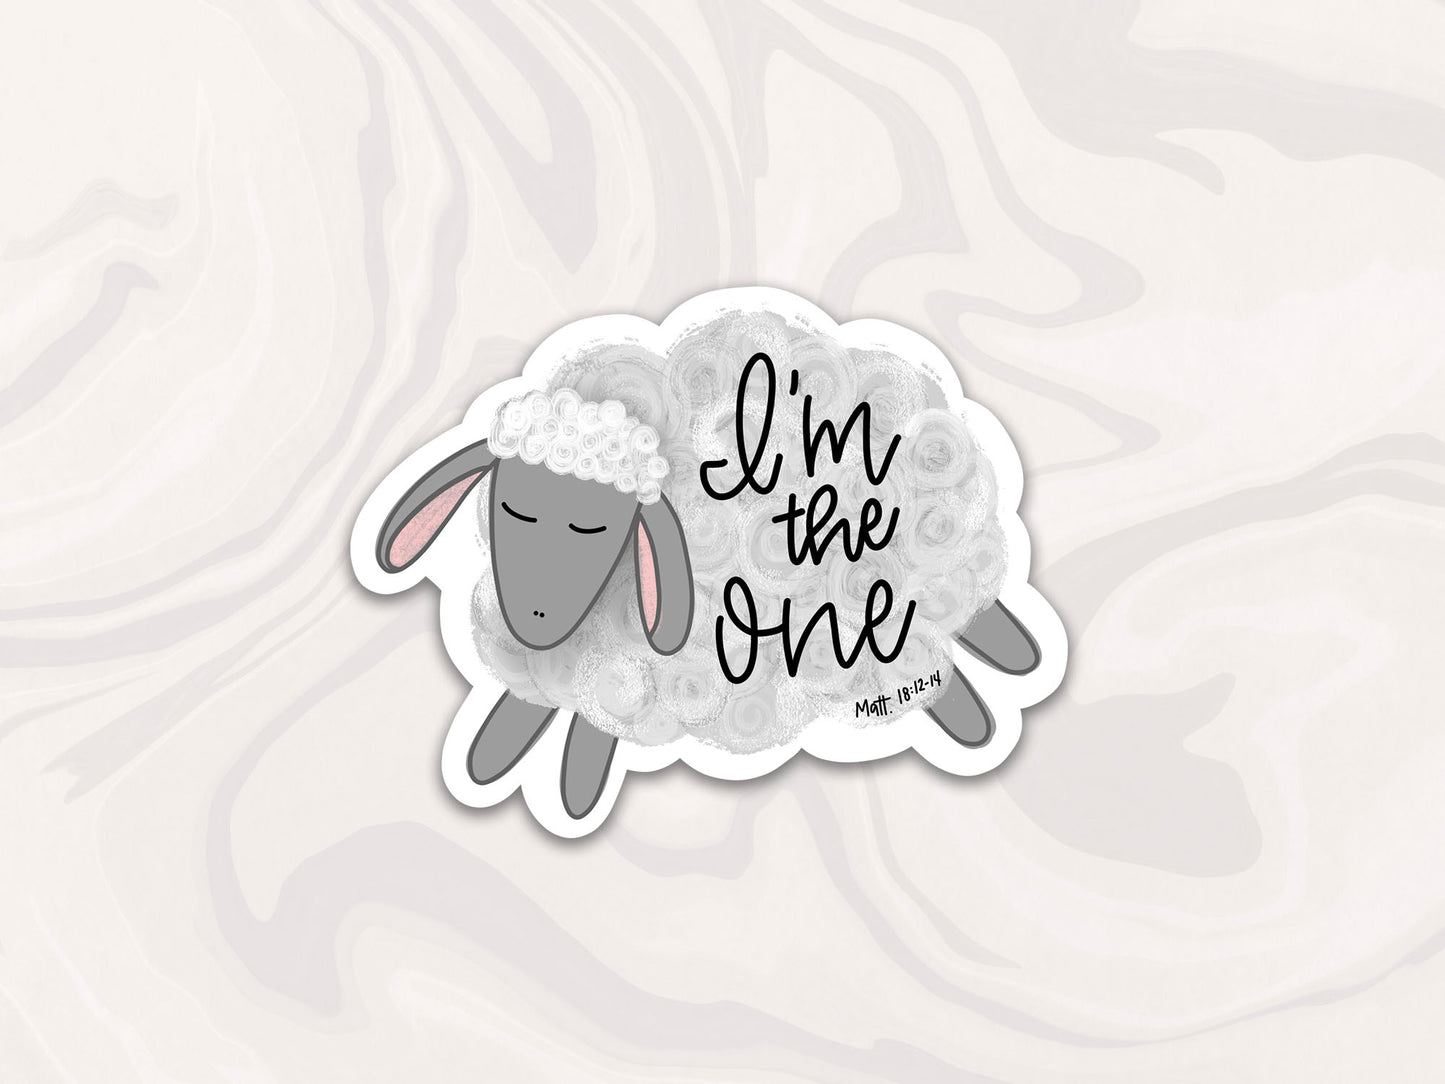 sheep sticker that says I'm the One referencing Matthew 18:12-14, Bible verse sticker